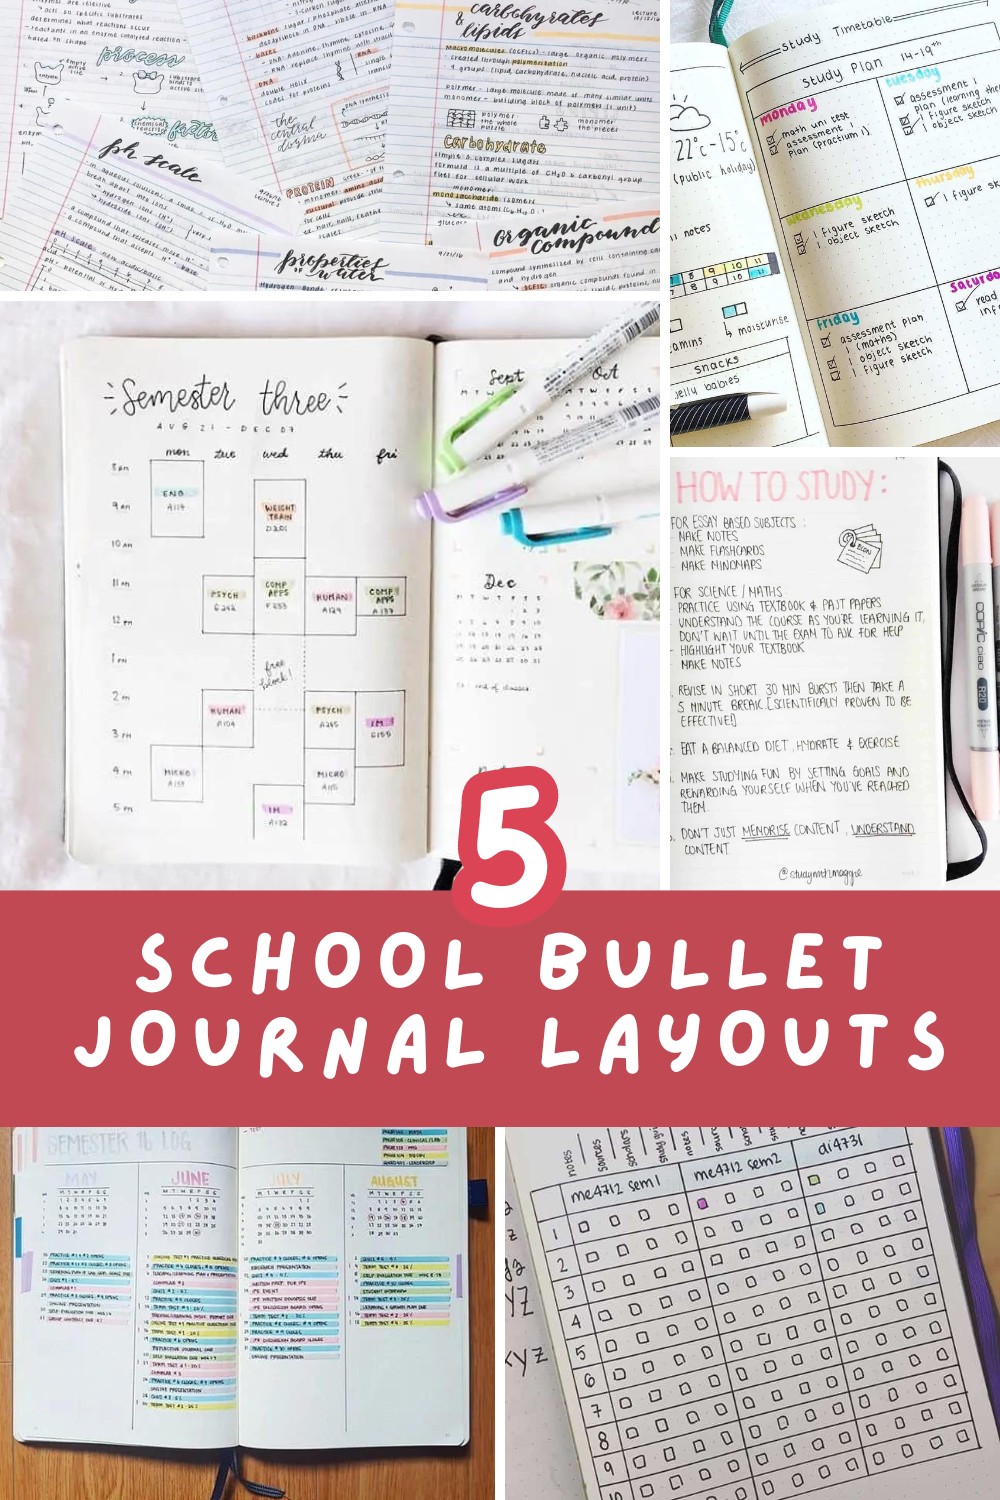 Stay on top of your study game with these genius Bullet Journal layouts! Perfect for keeping you on track this semester, even if you're new to BuJo. Get organized and inspired! #BulletJournal #StudyTips